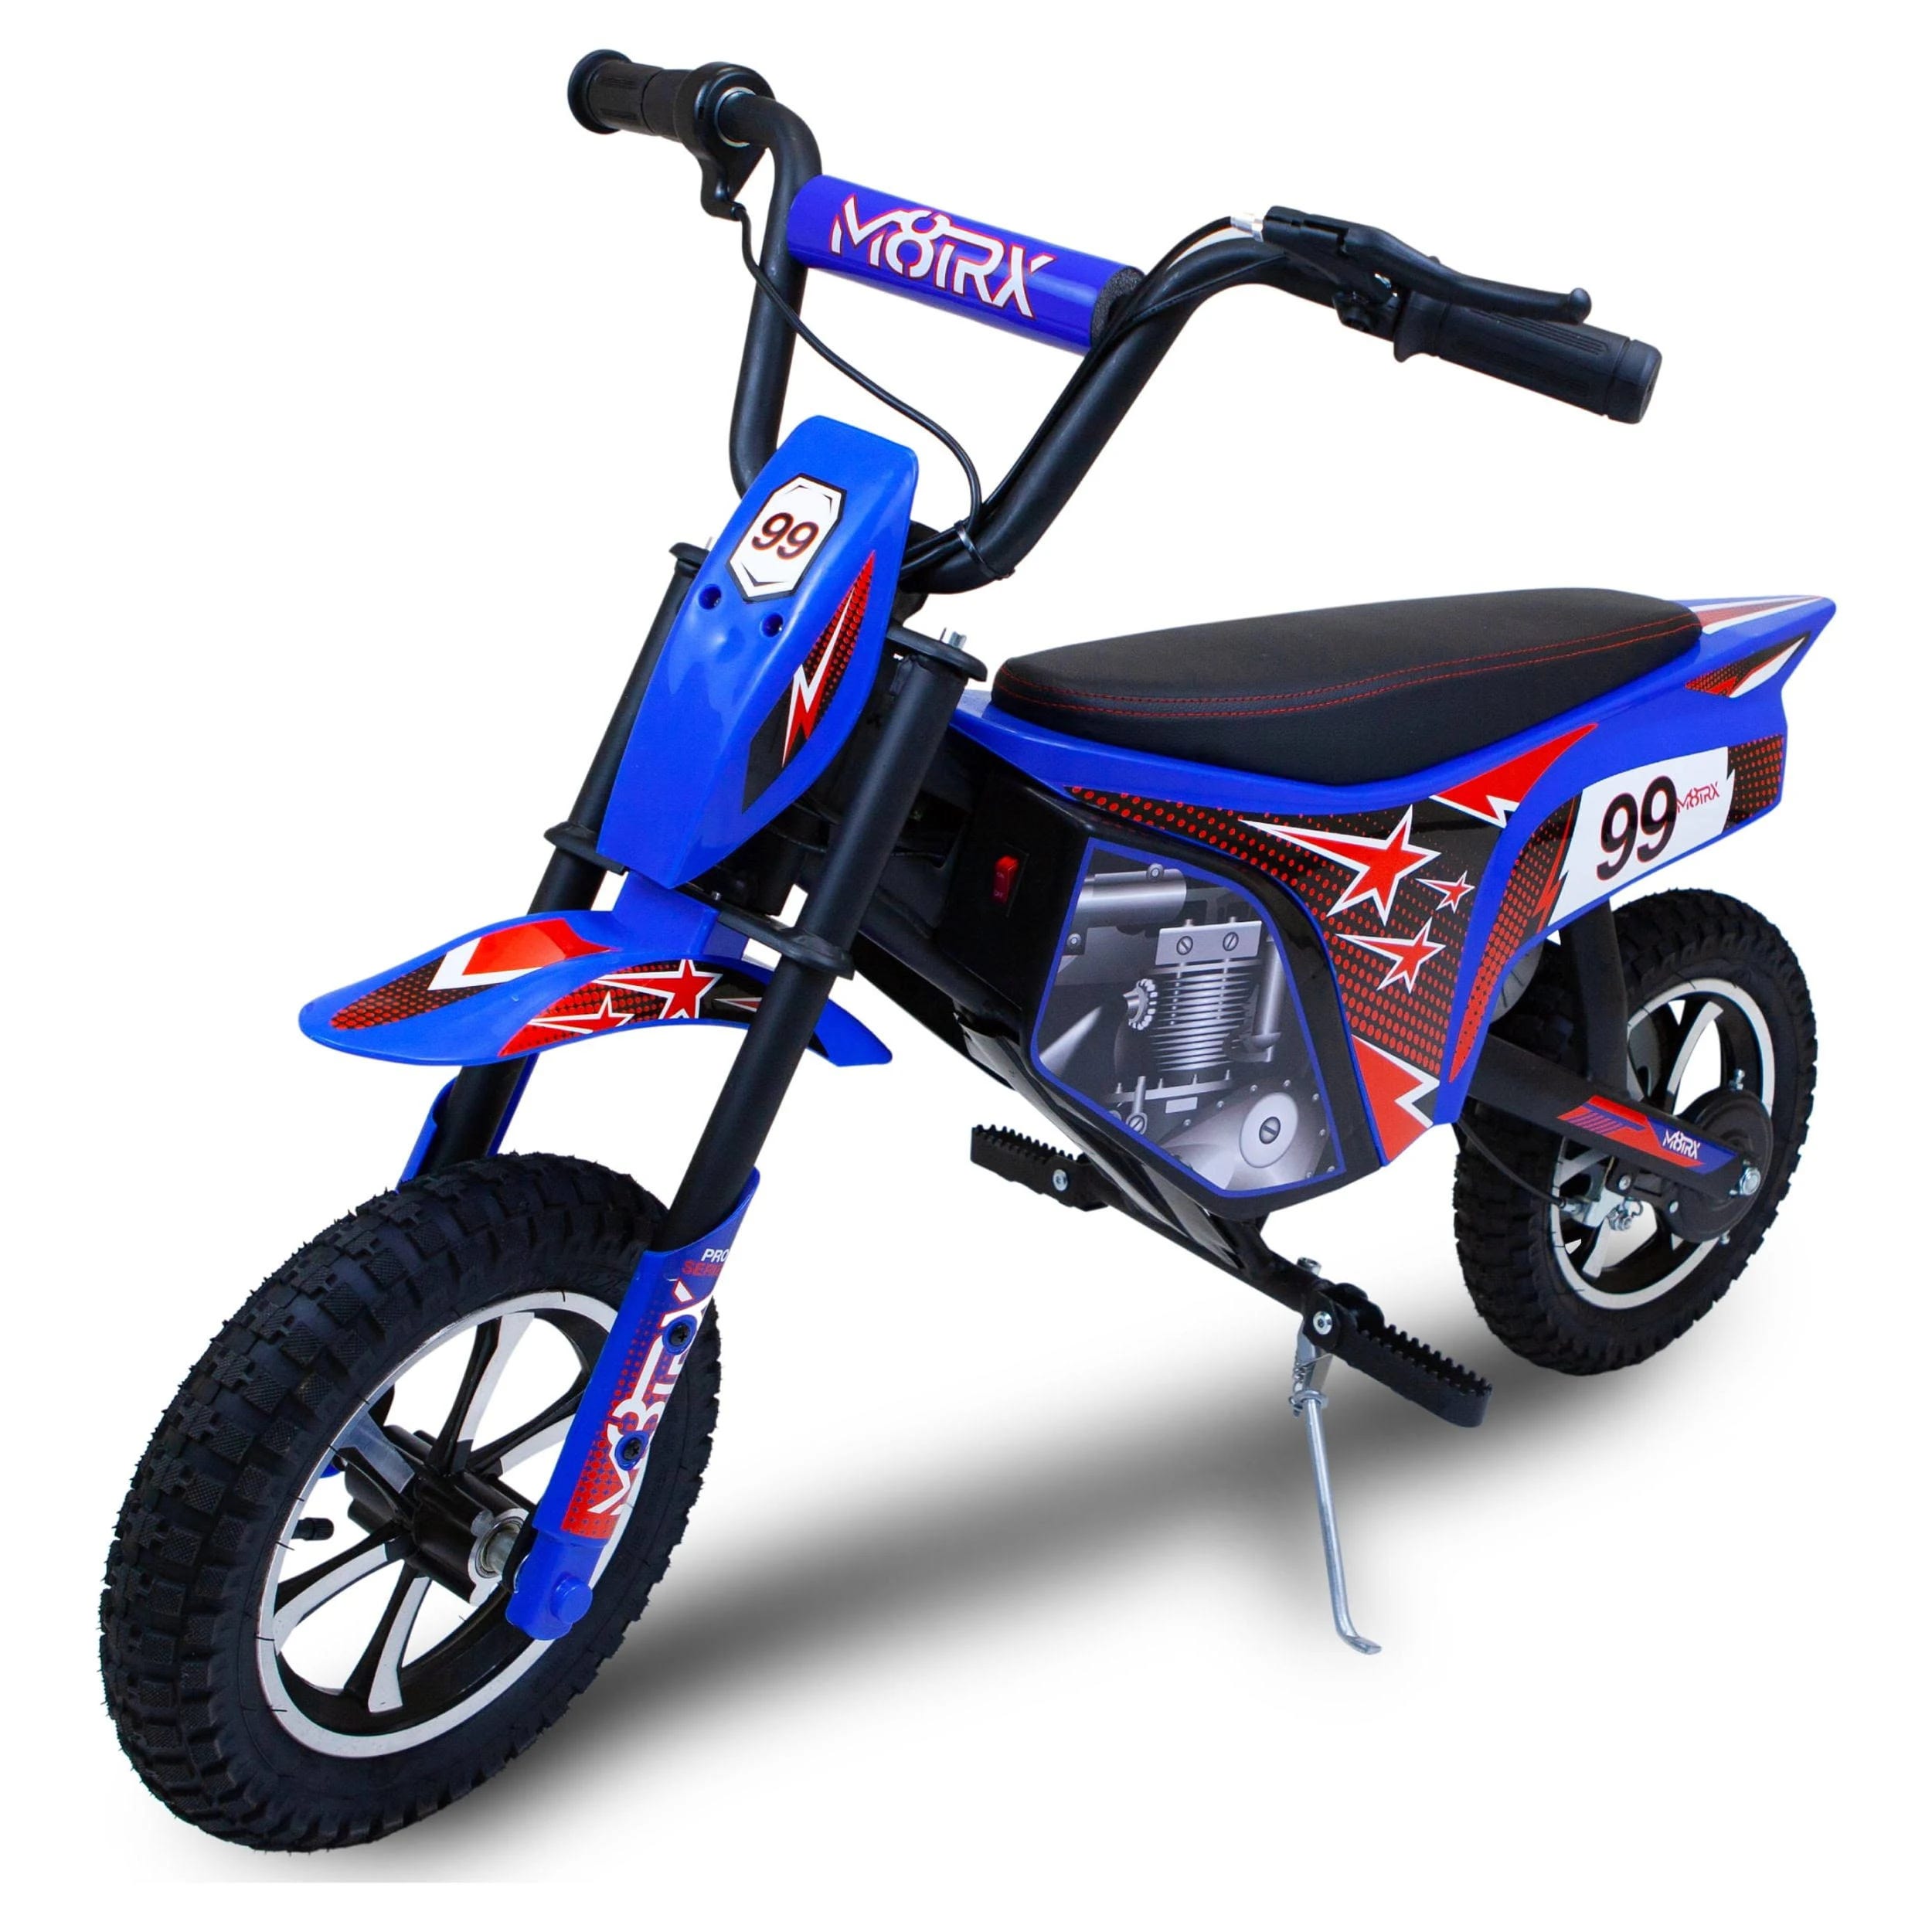 Electric Dirt Bike for Kids Ages 8 to 14: Exciting Motorcycle Adventures | Image